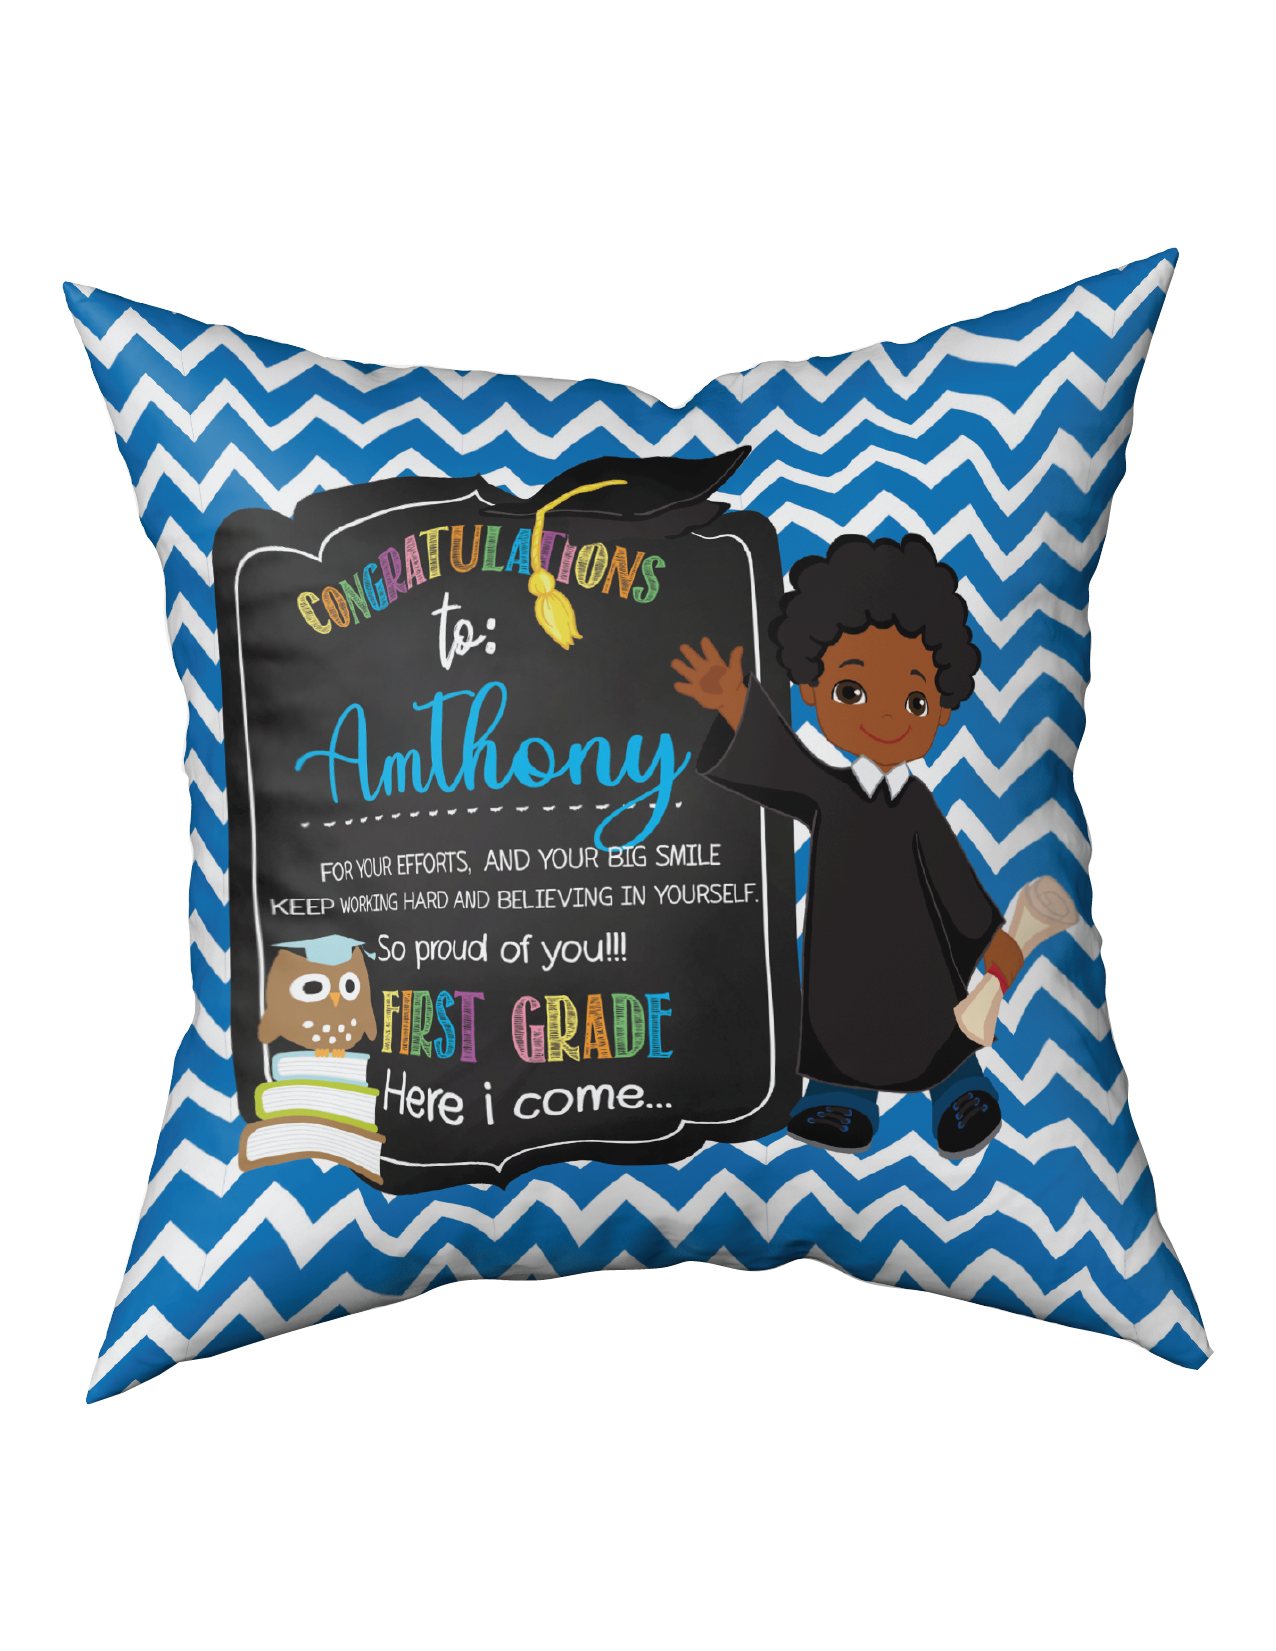 Male Learning Pillow